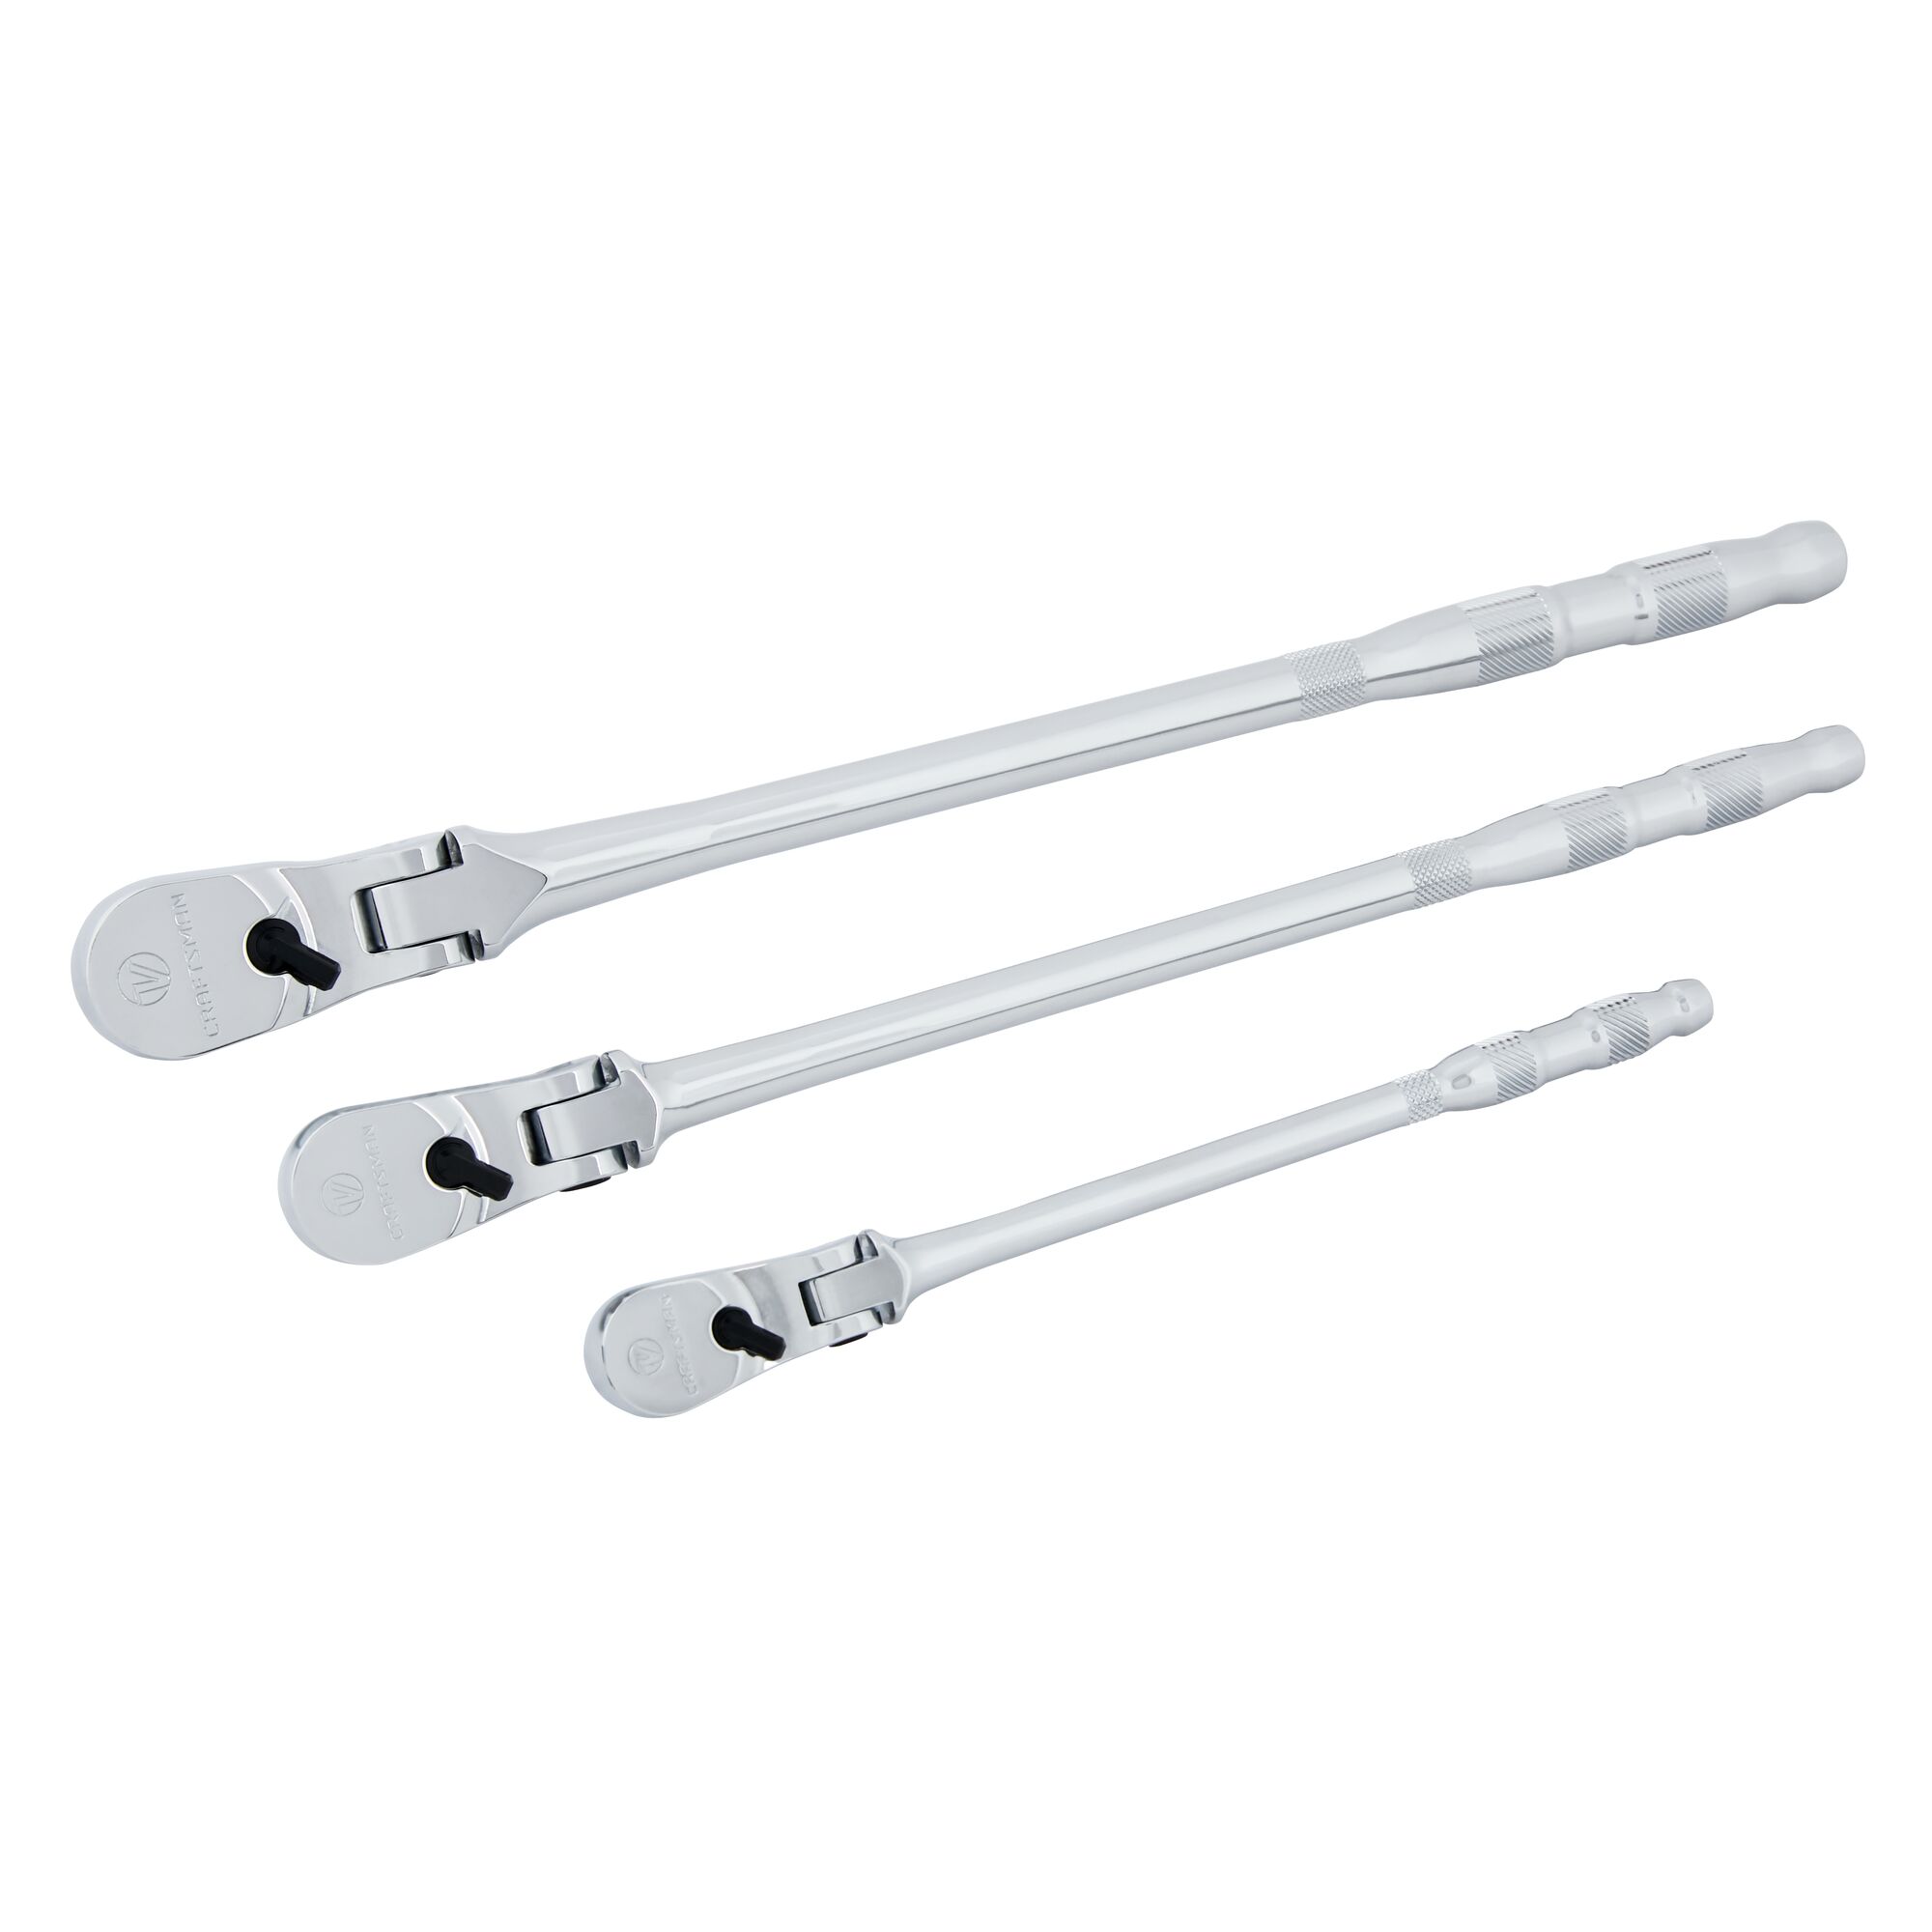 Profile of V series quarter inch three eighth inch and half inch drive long flex head ratchet. 3 pack